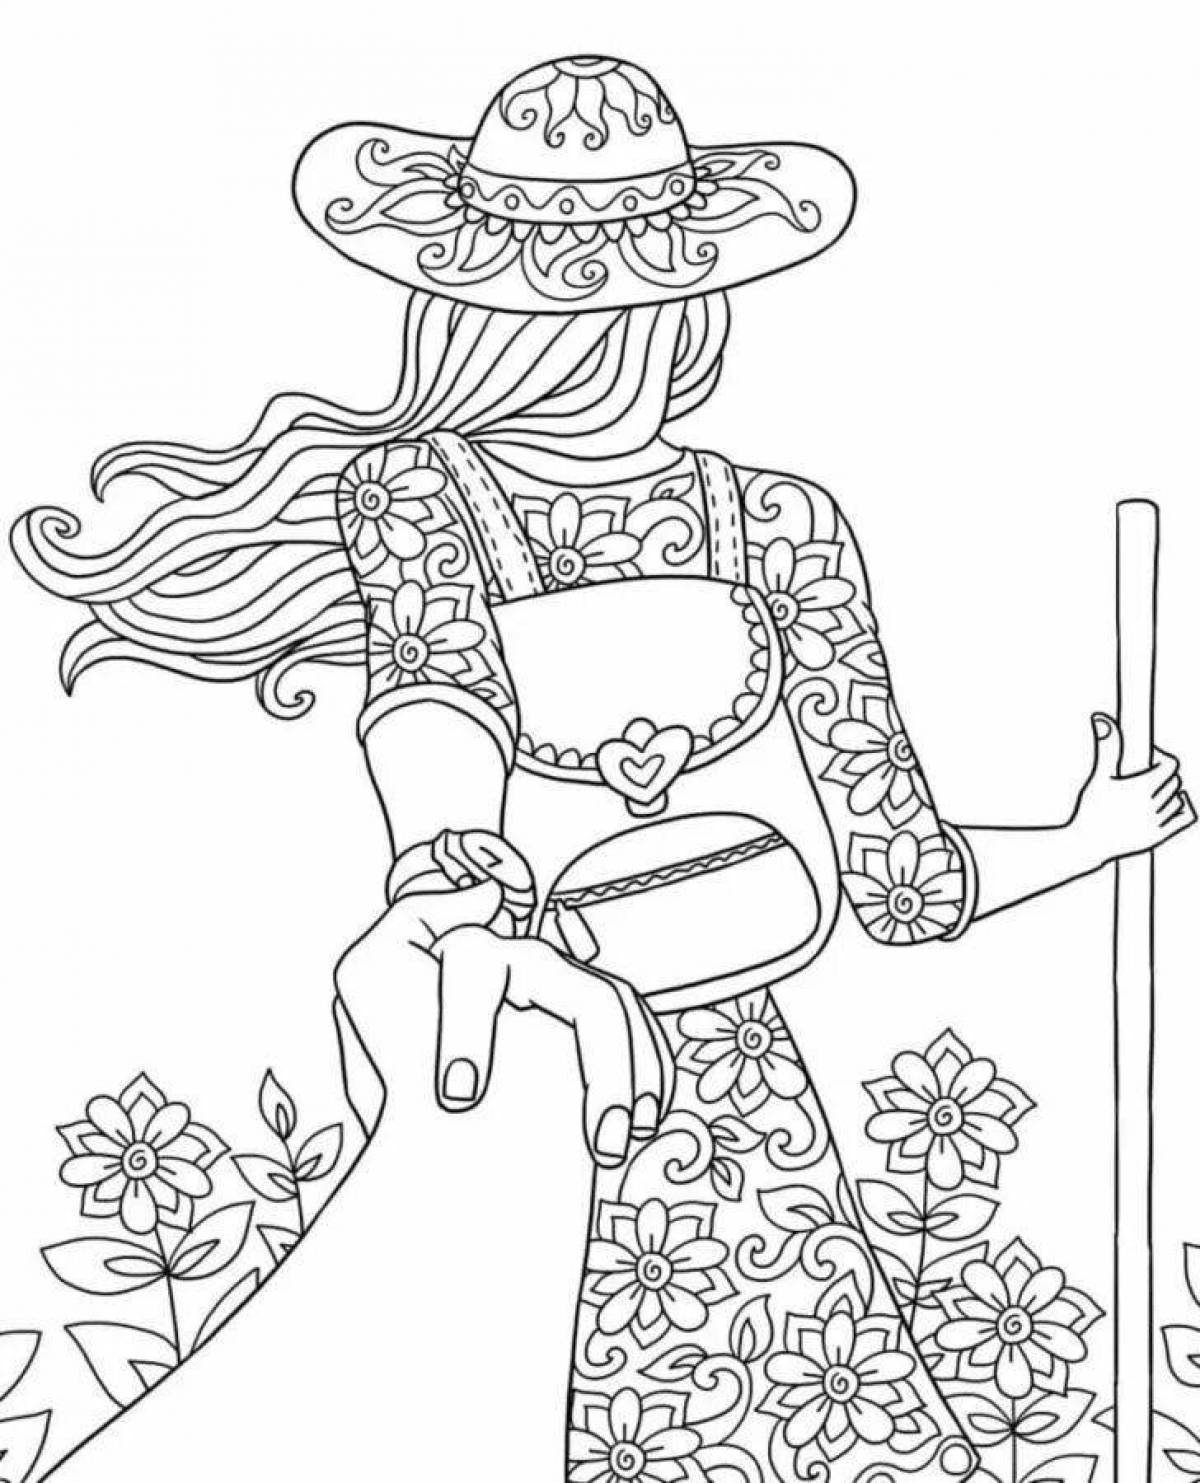 Colorful trendy coloring book